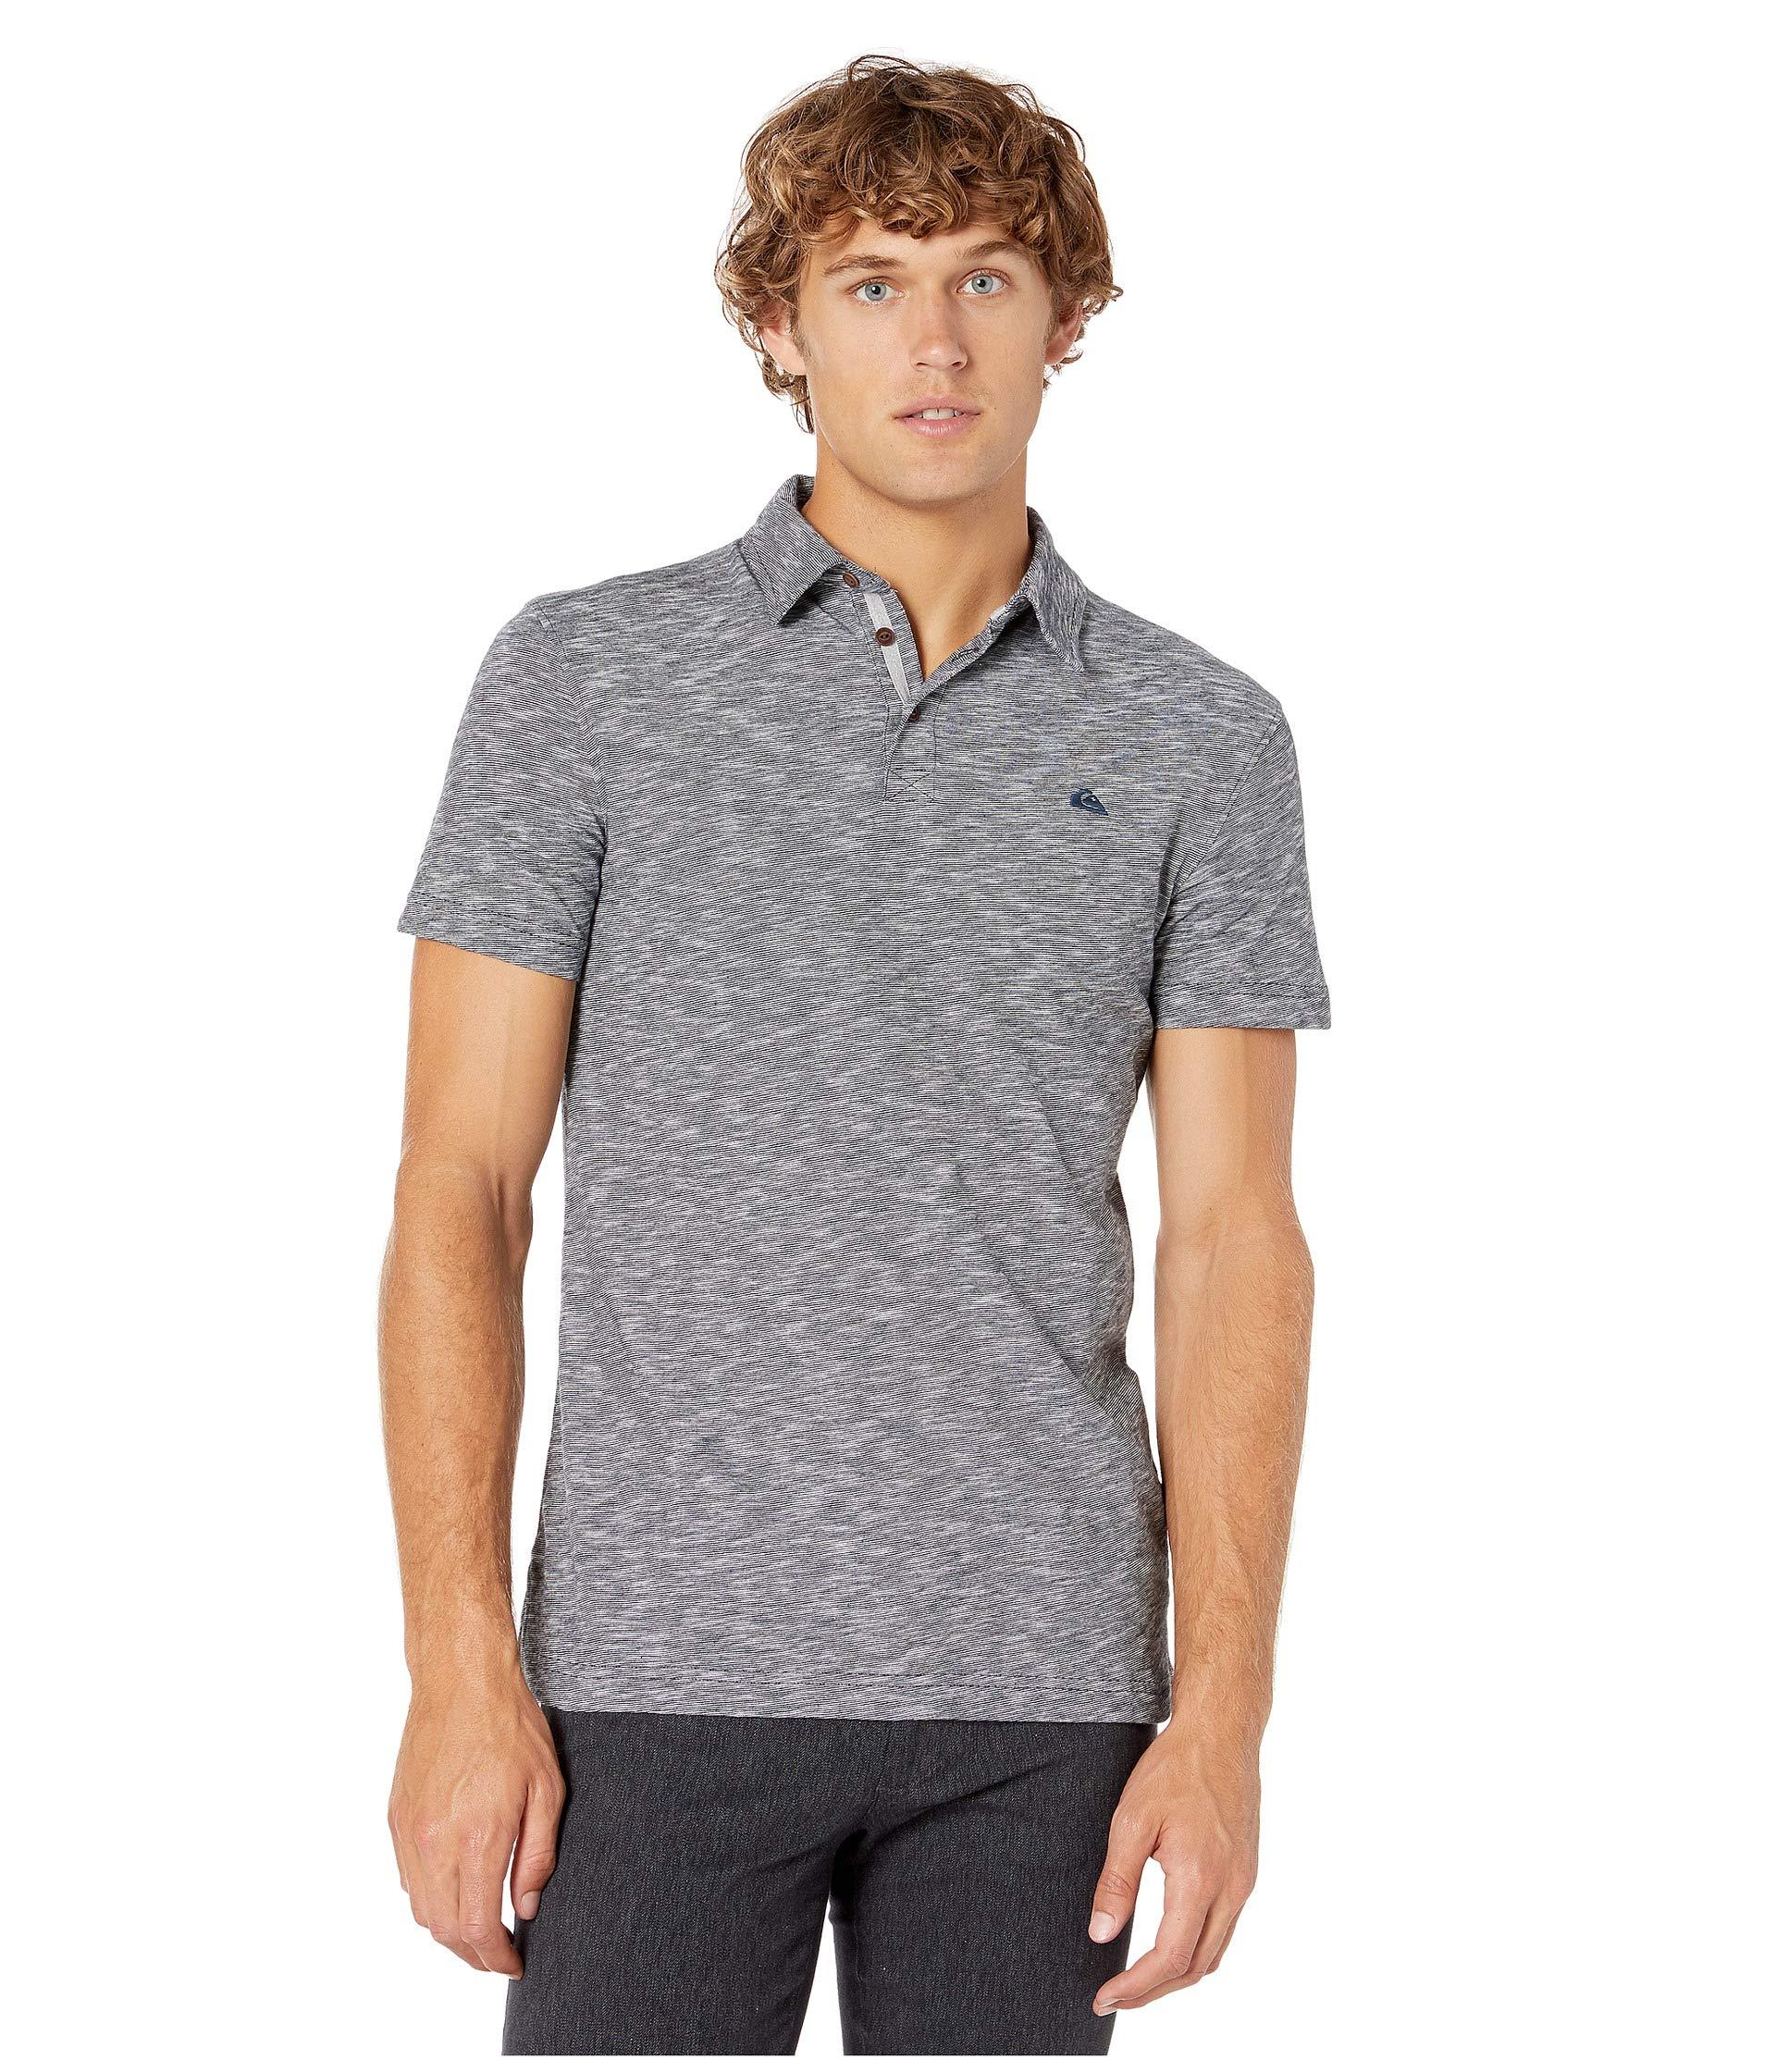 Quiksilver Cotton Everyday Sun Cruise Polo in Gray for Men - Lyst